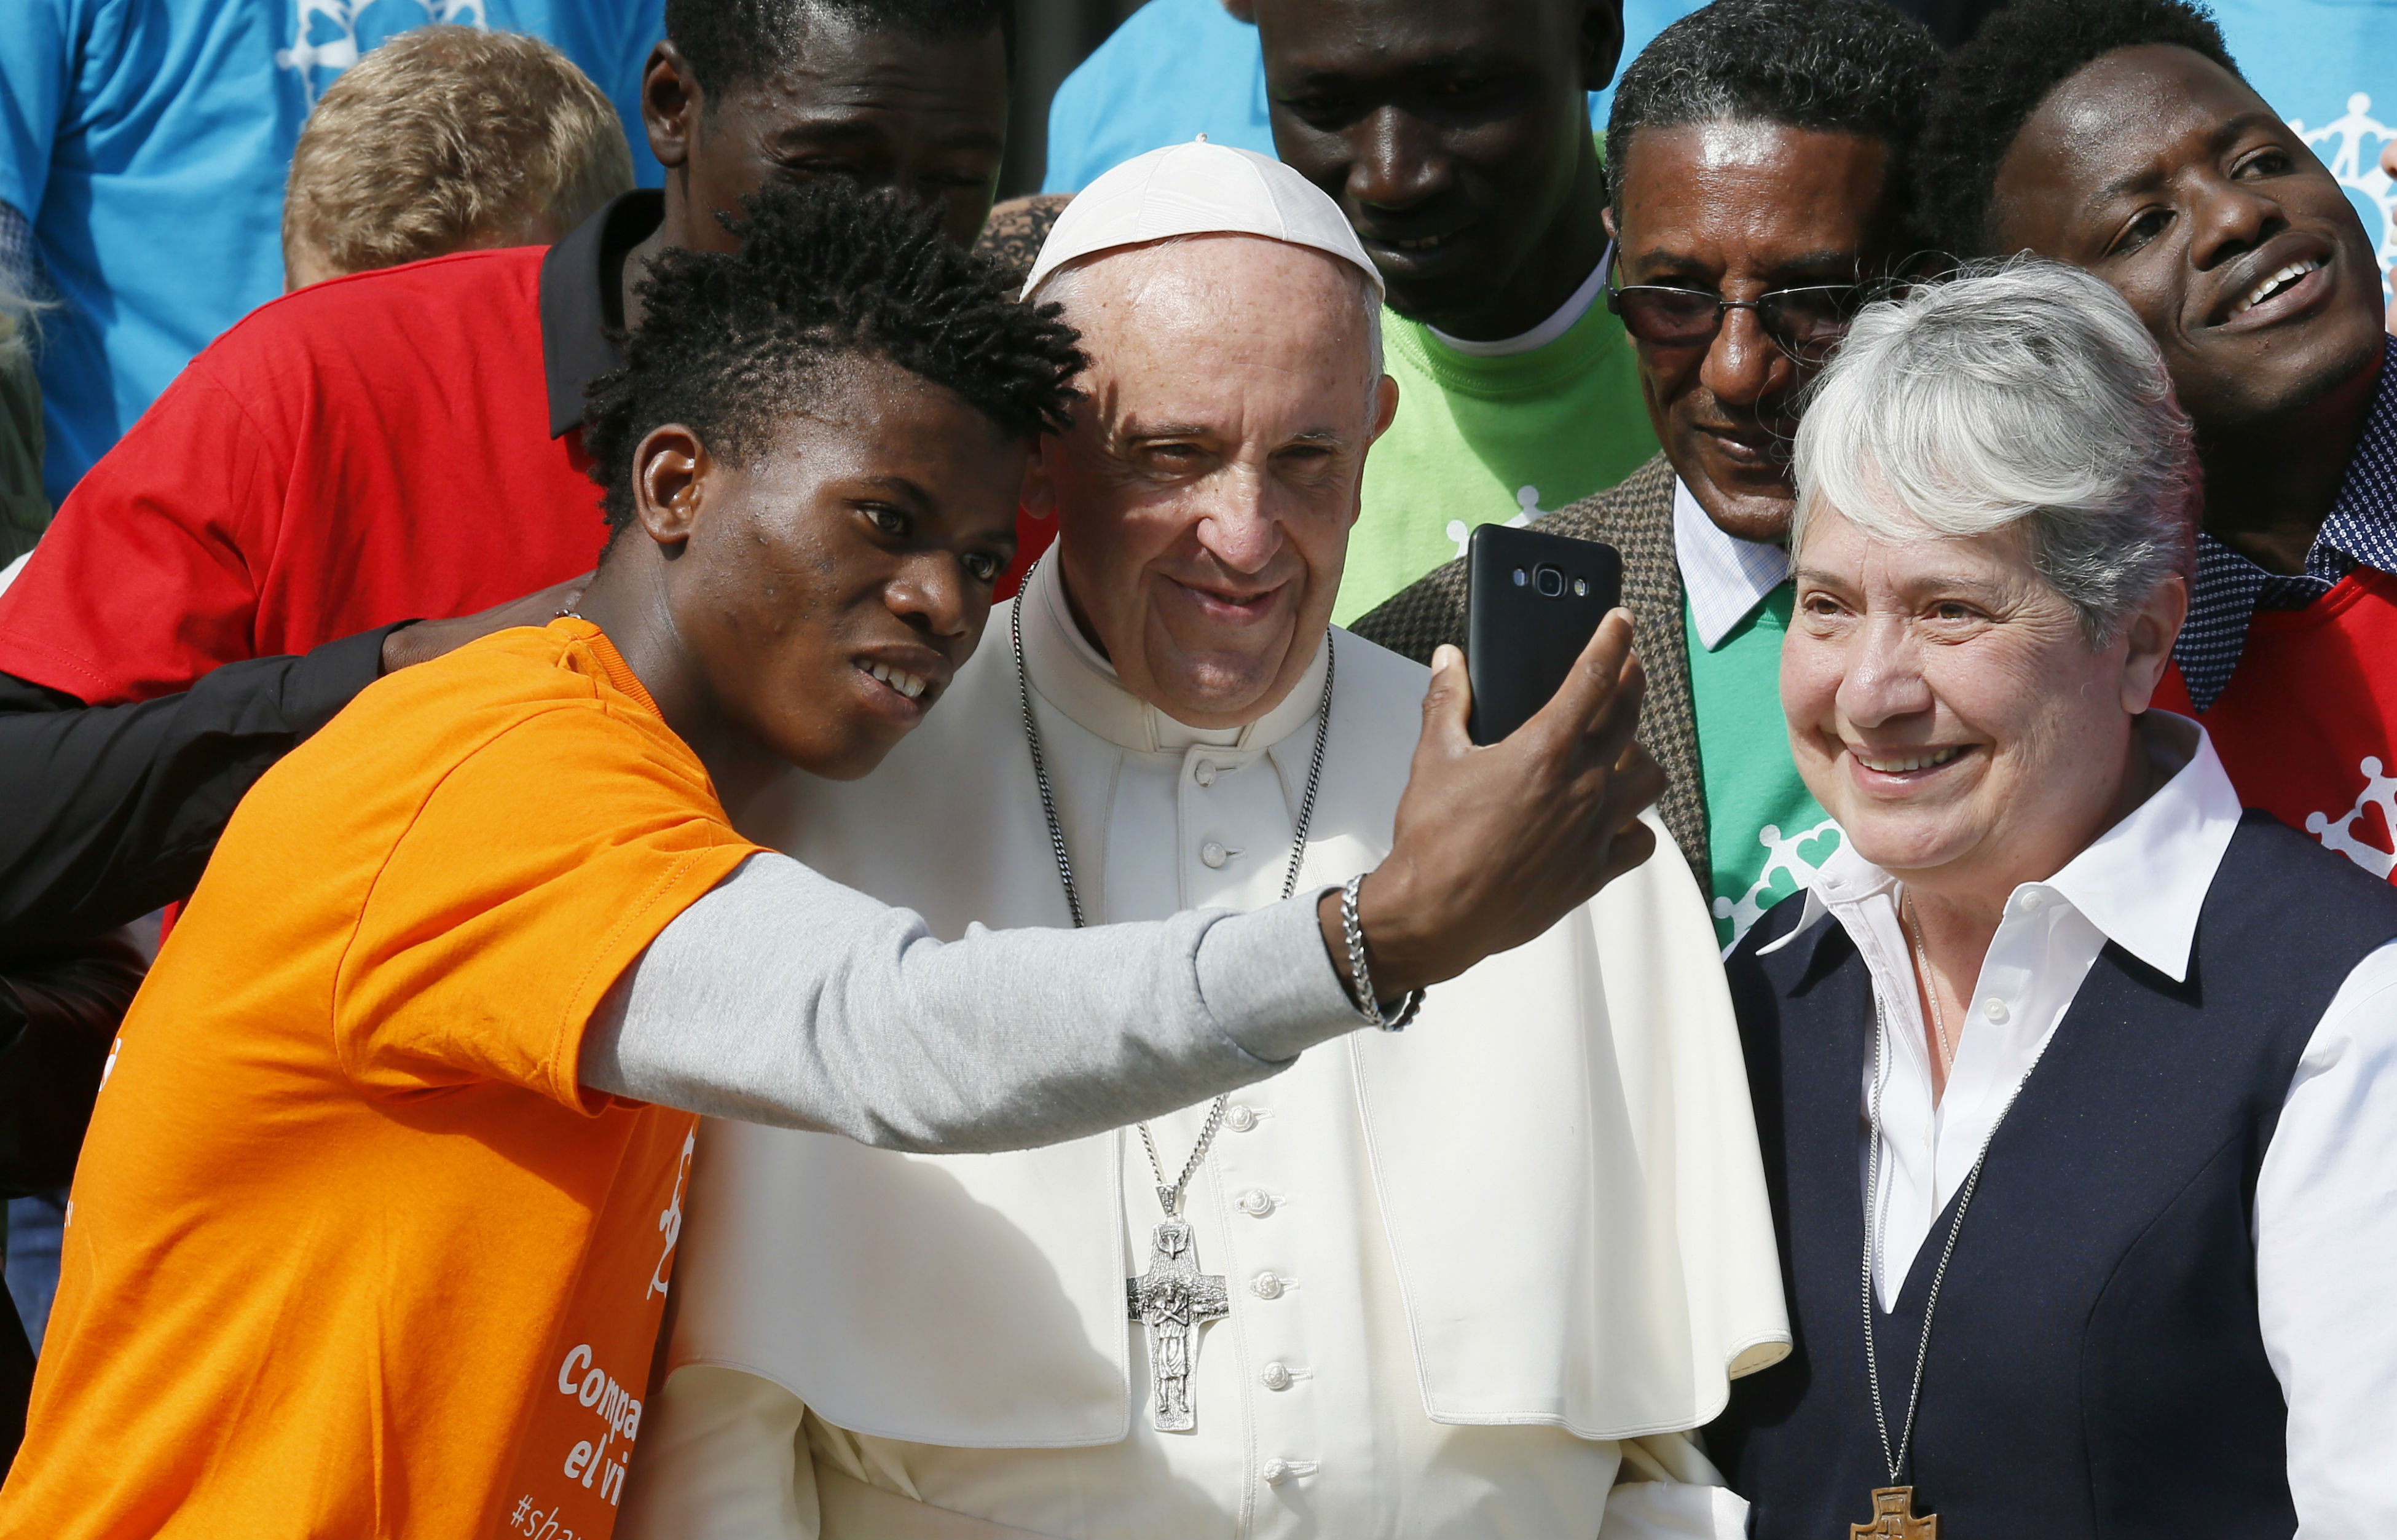 Share hope with those seeking better lives, pope says